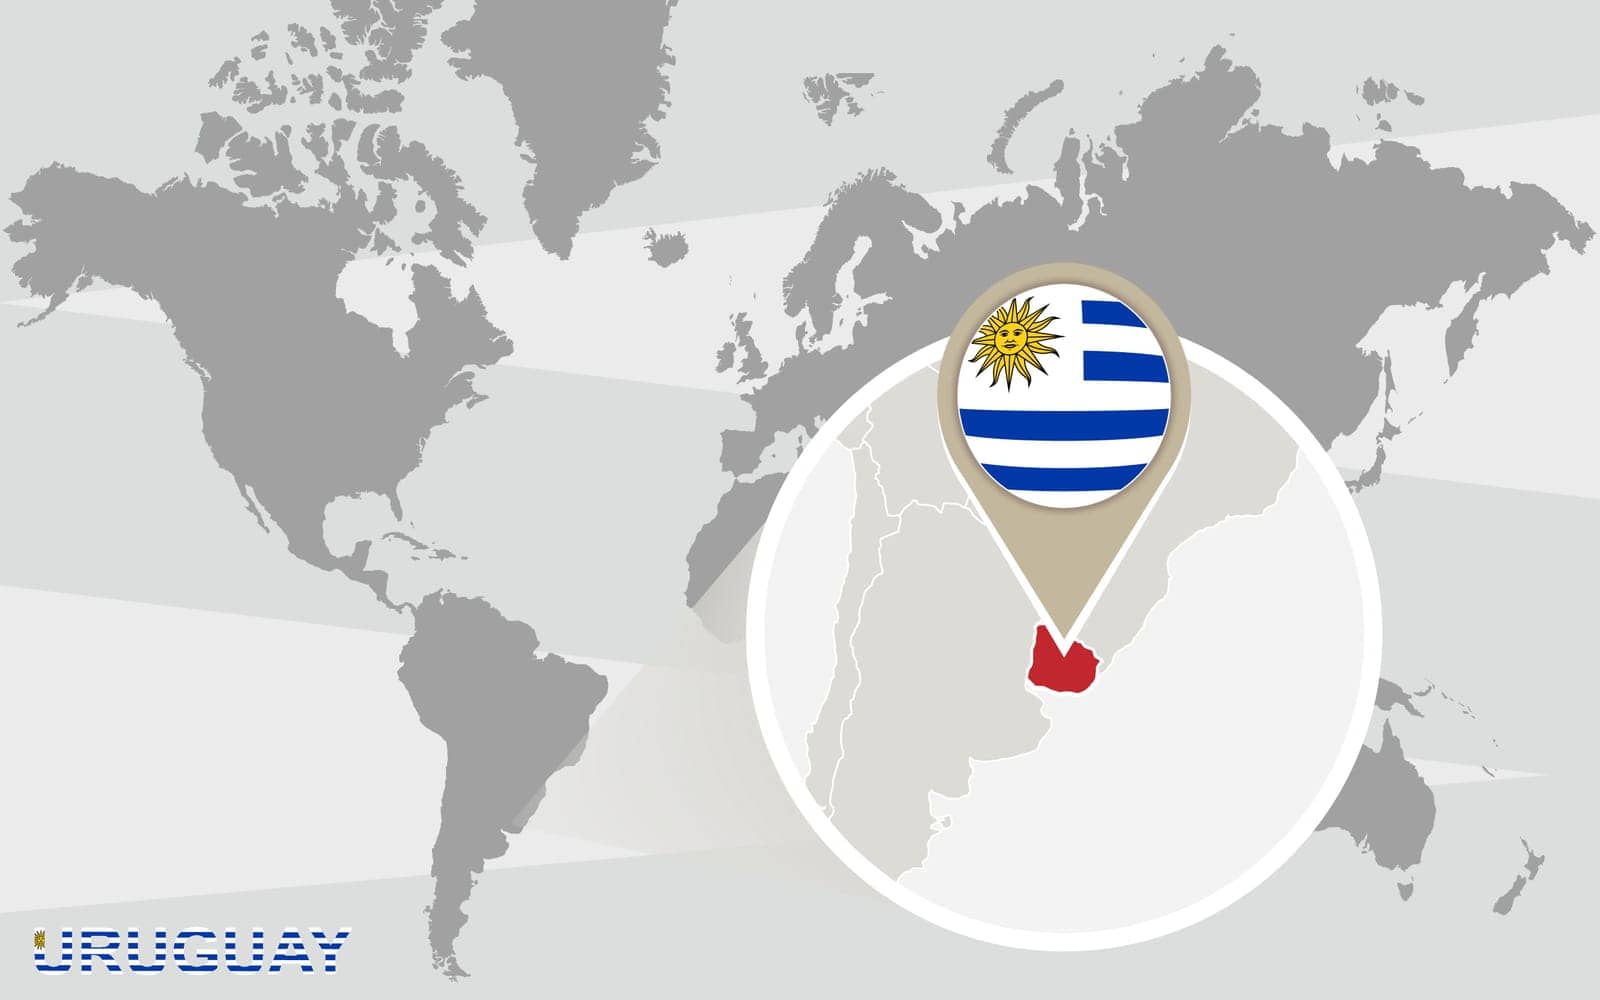 World map with magnified Uruguay. Uruguay flag and map.